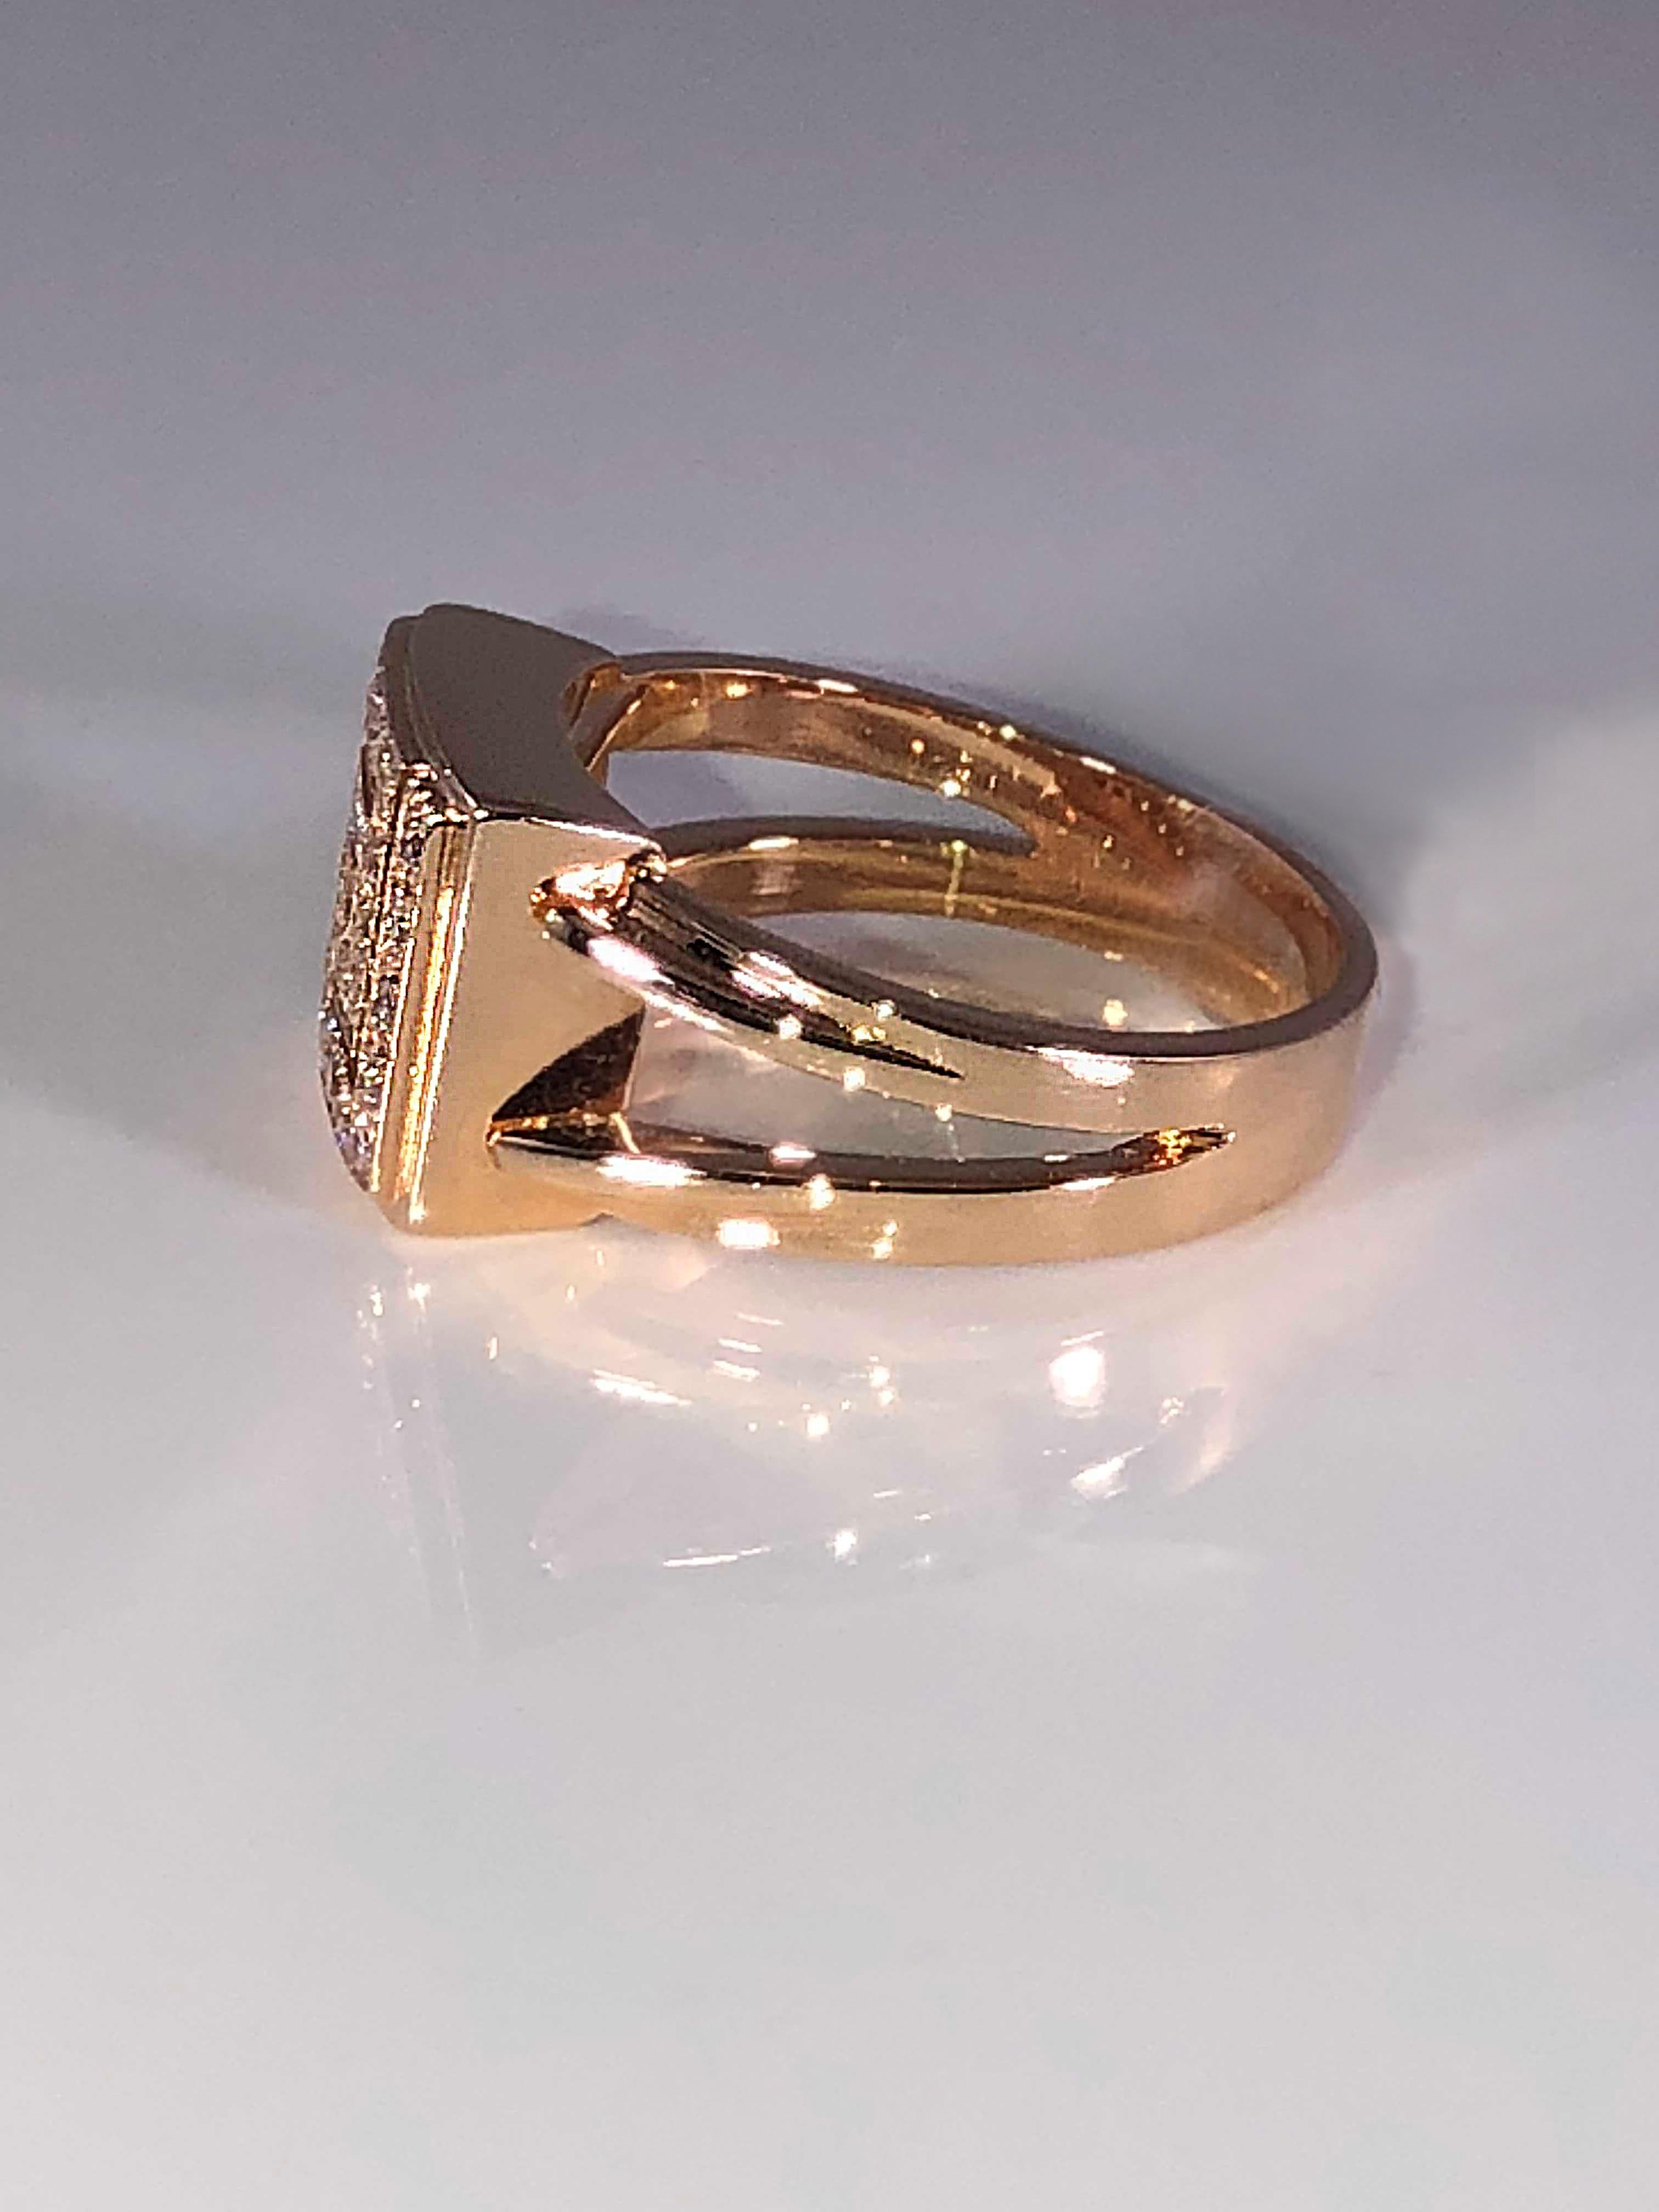 S. Georgios design 18 Karat Rose Gold Ring all handmade with the Greek Key design that symbolizes eternity. It is known as the symbol of long life and is the first geometric design found almost 2000 BC. The gorgeous ring is decorated with White